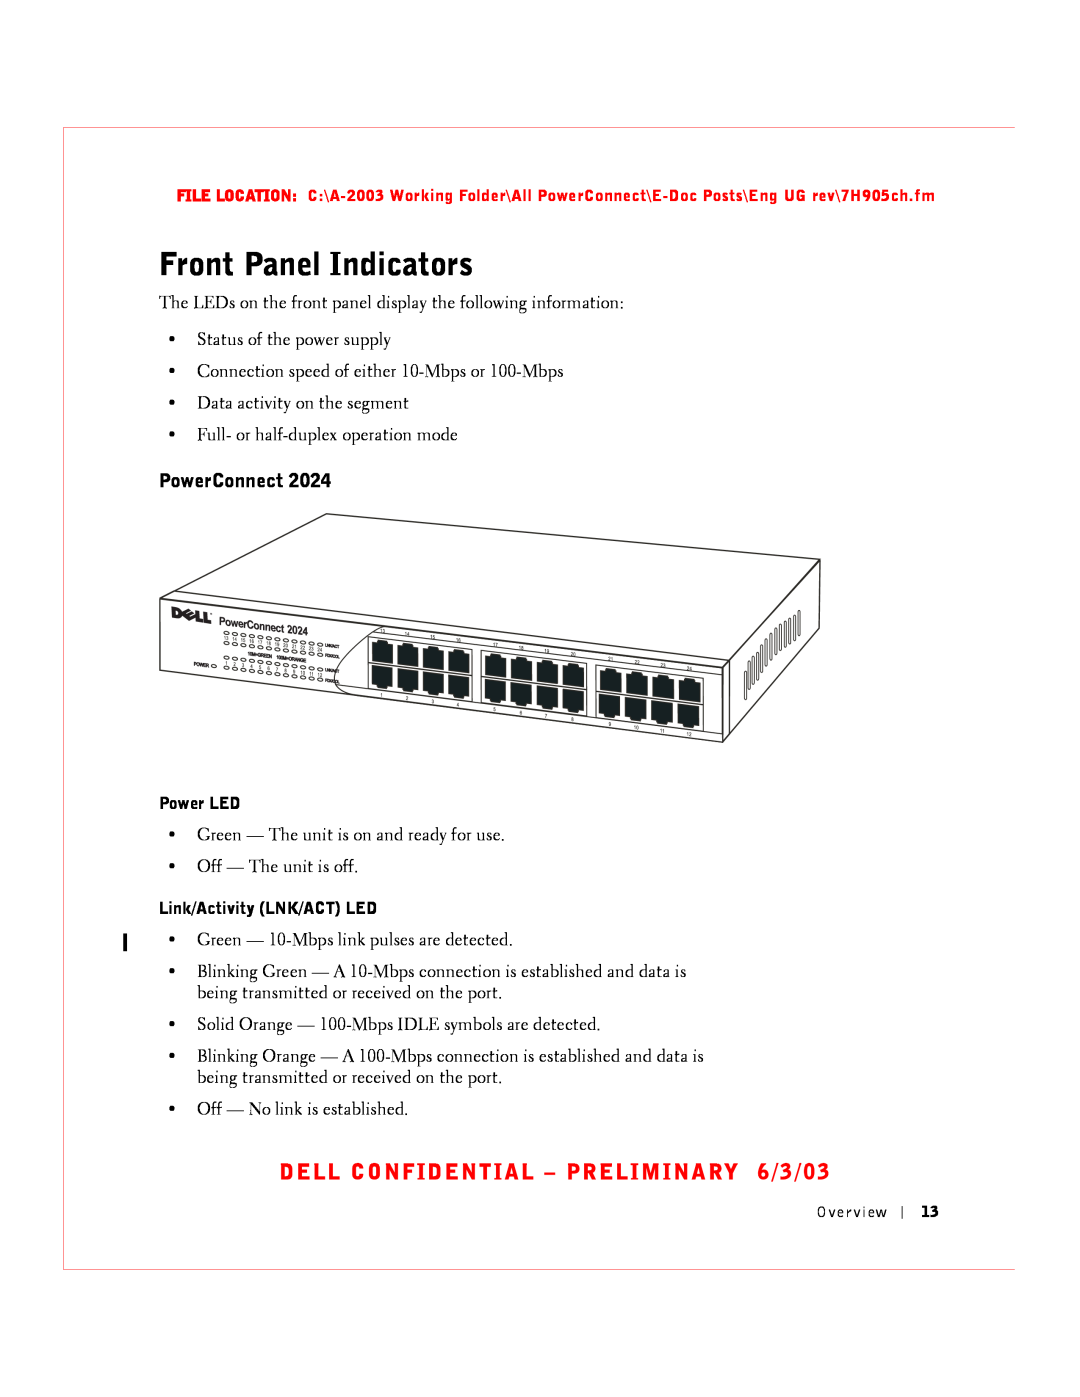 Dell 2016, 2024 manual Front Panel Indicators, PowerConnect, DELL CONFIDENTIAL - PRELIMINARY 6/3/03 